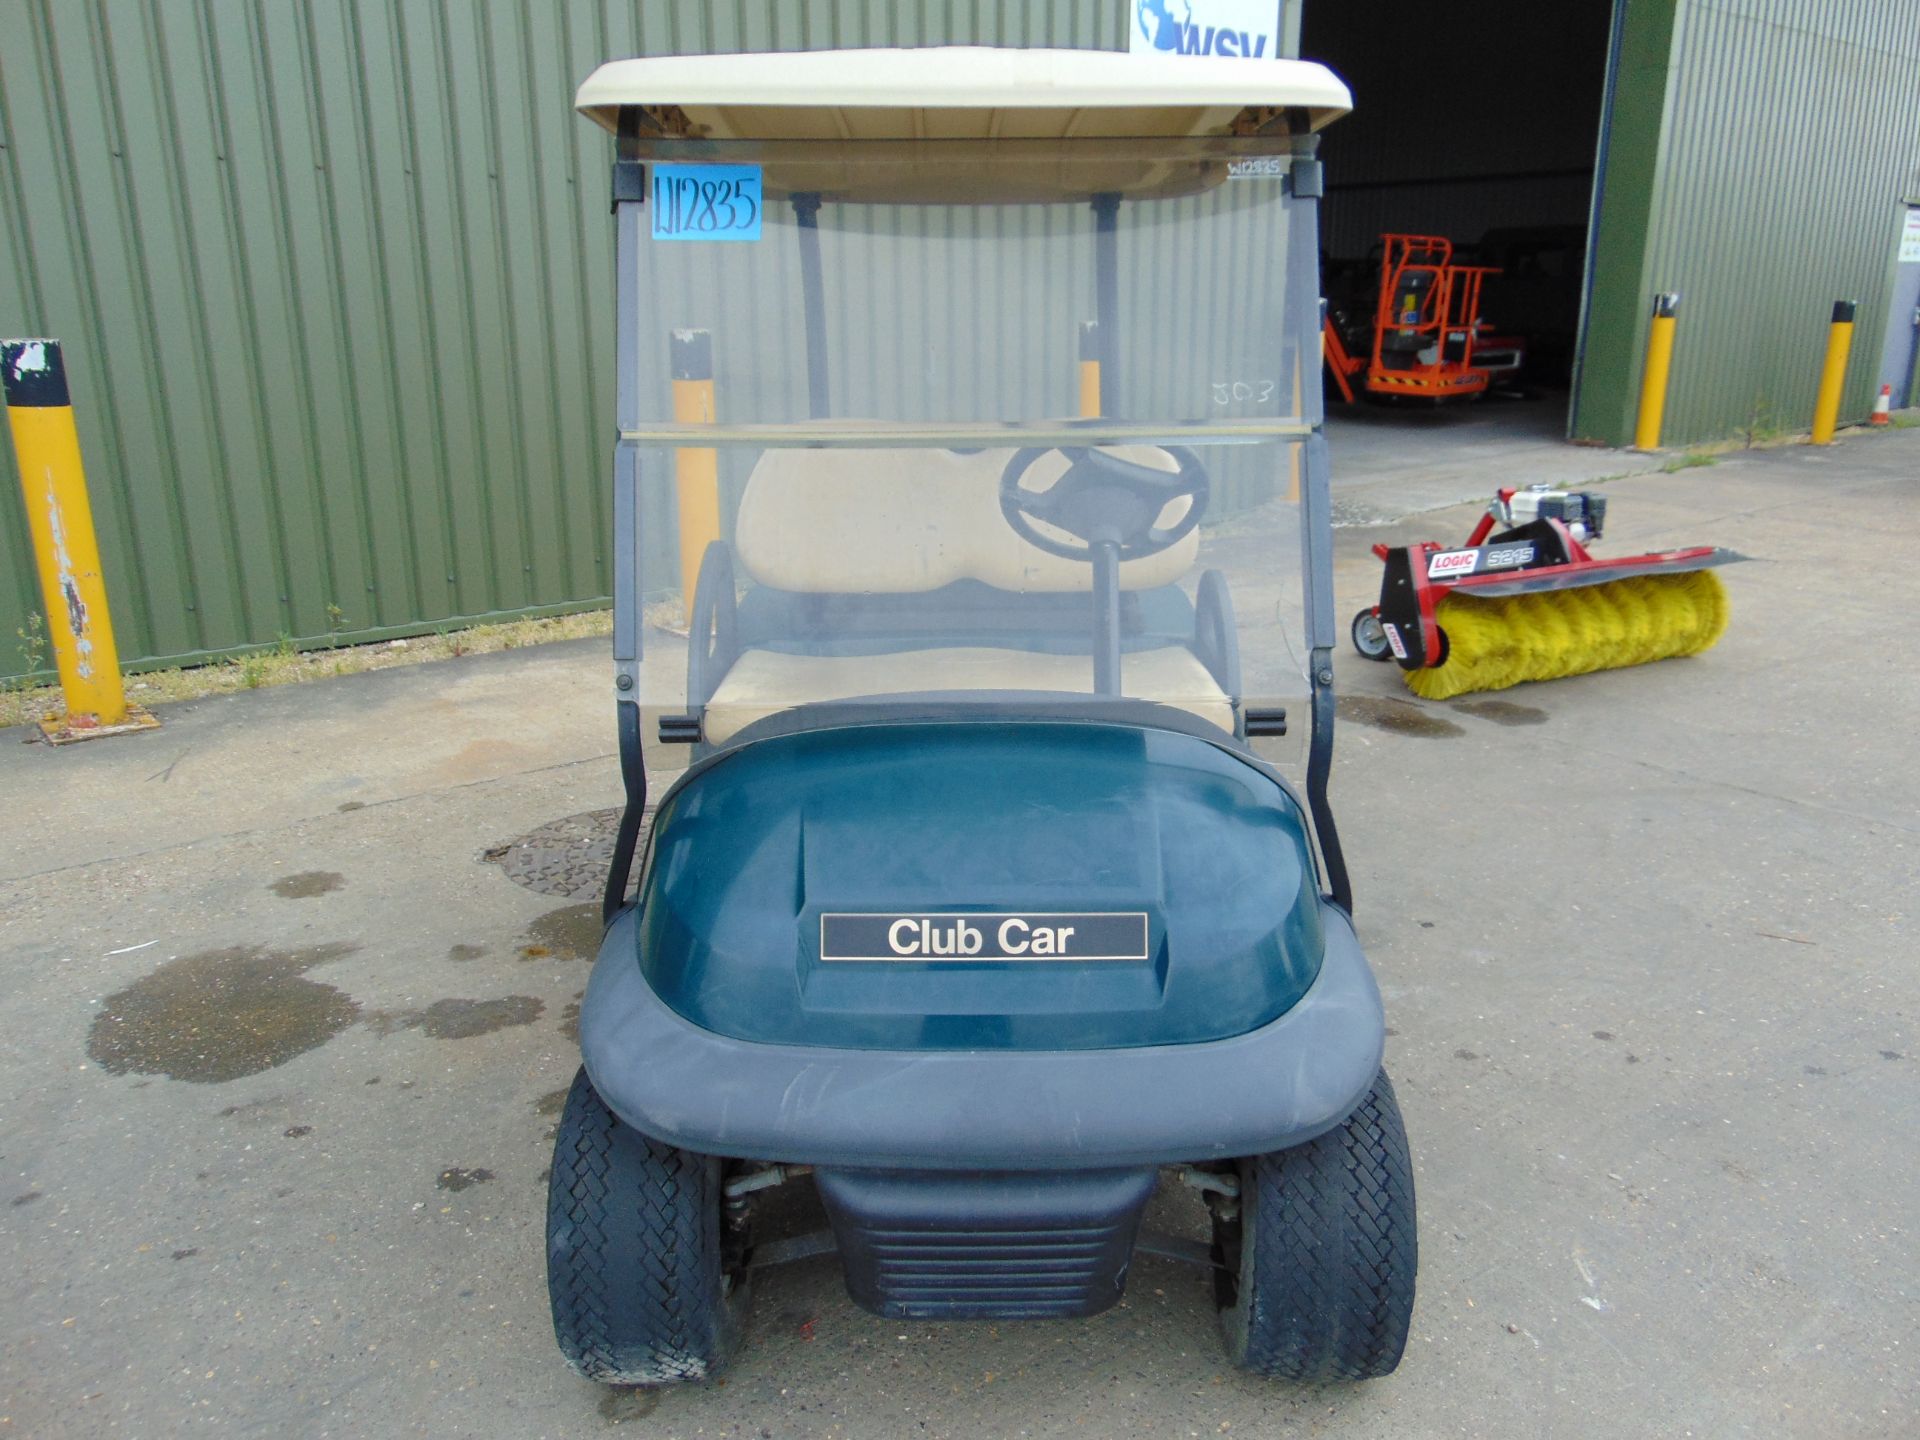 Club Car 2 Seat Electric Golf Buggy C/W Battery Charger - Image 2 of 13